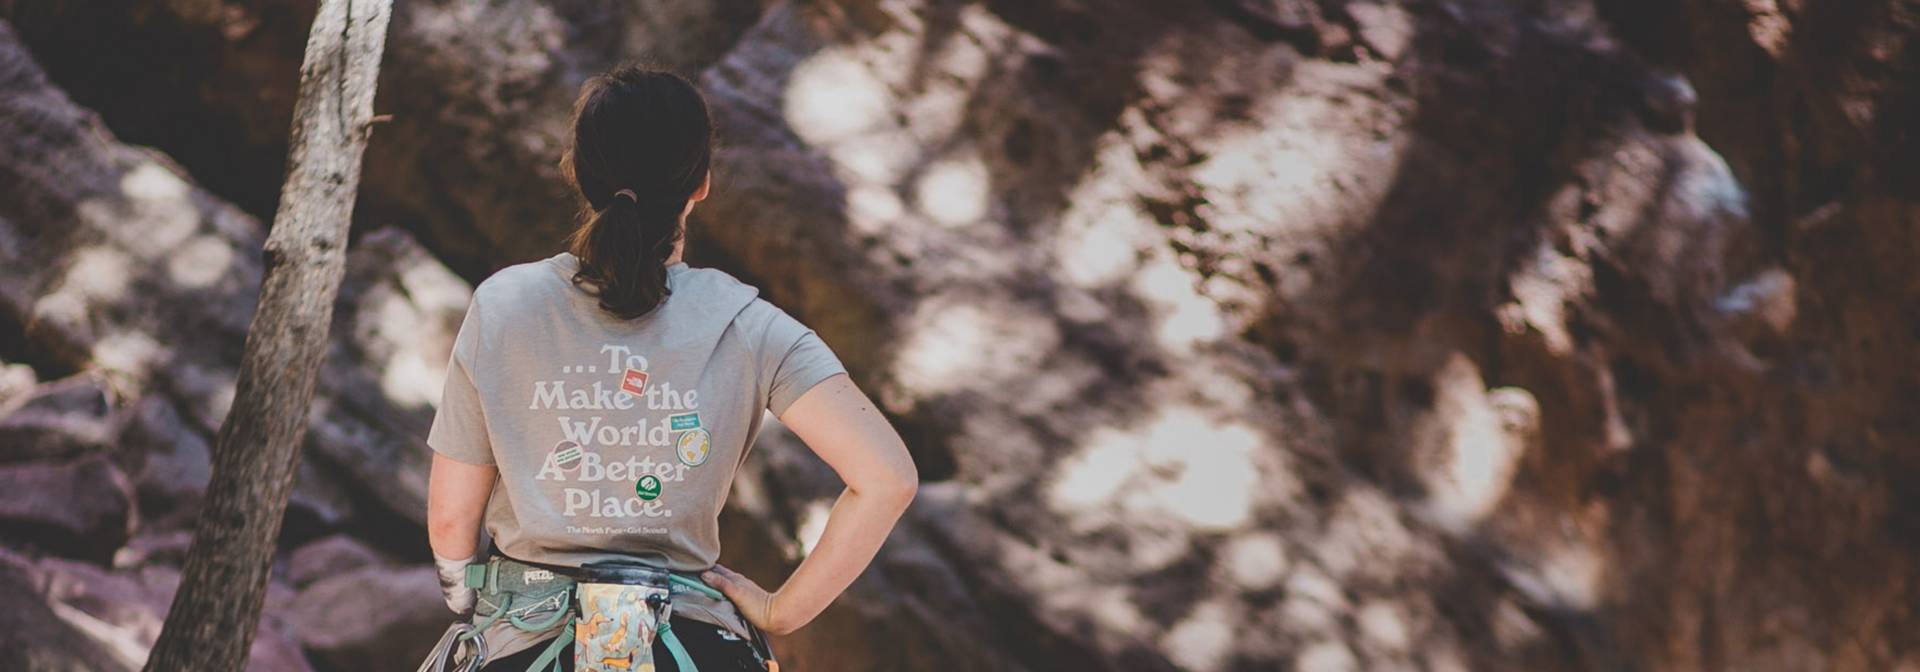 The North Face team athlete Maureen Beck stands with her back turned, wearing a ...To Make the World a Better Place tee.